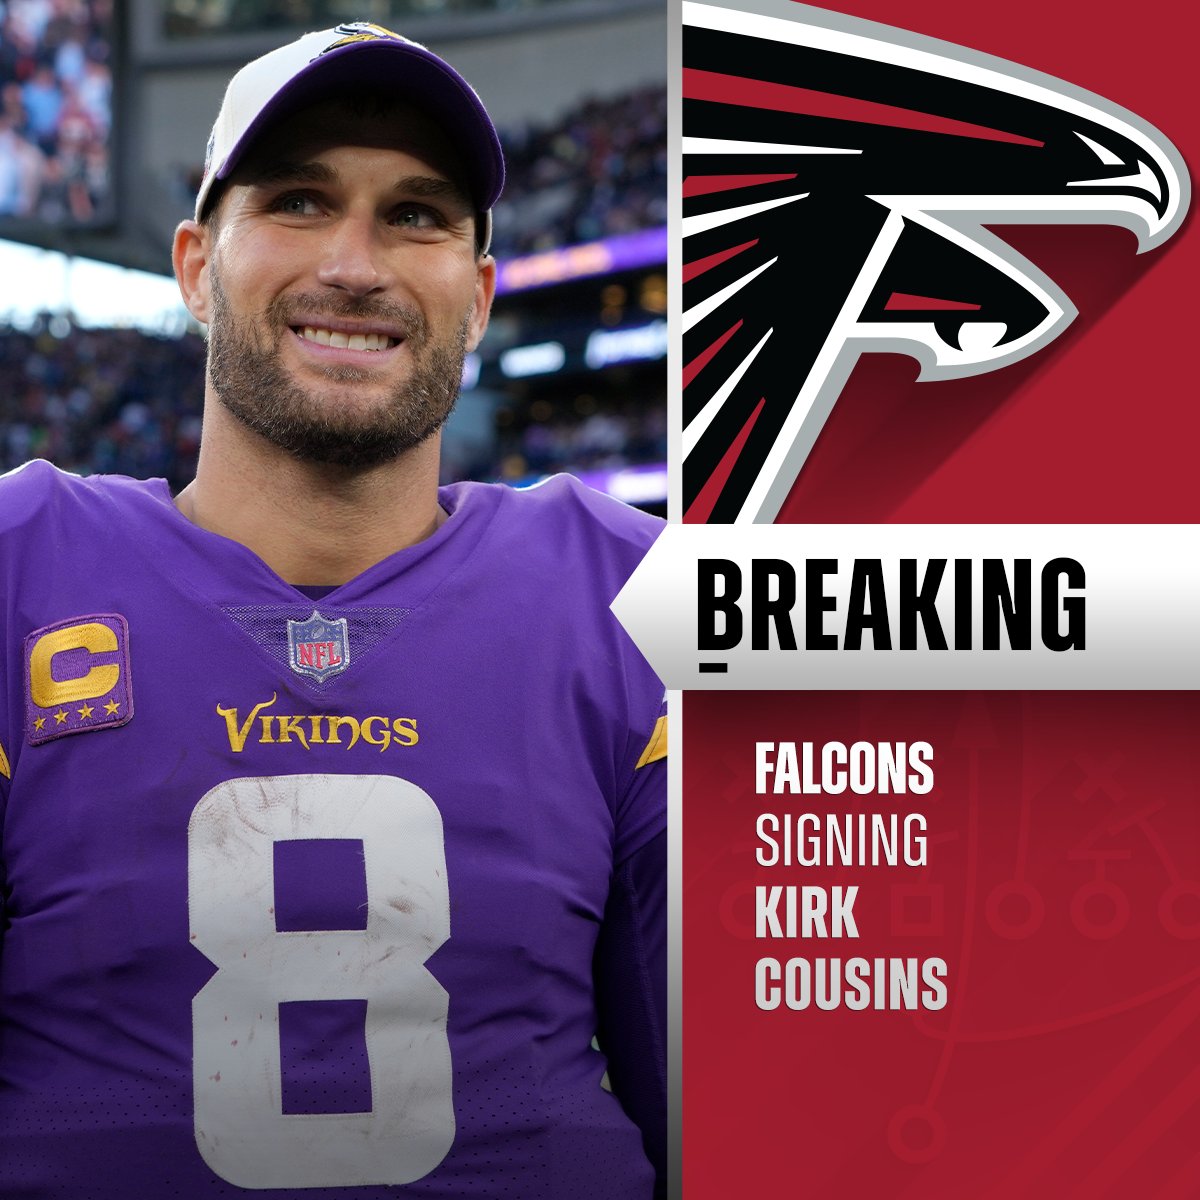 QB Kirk Cousins agrees to a 4-year deal with the Falcons. (via @MikeMcCartney7)